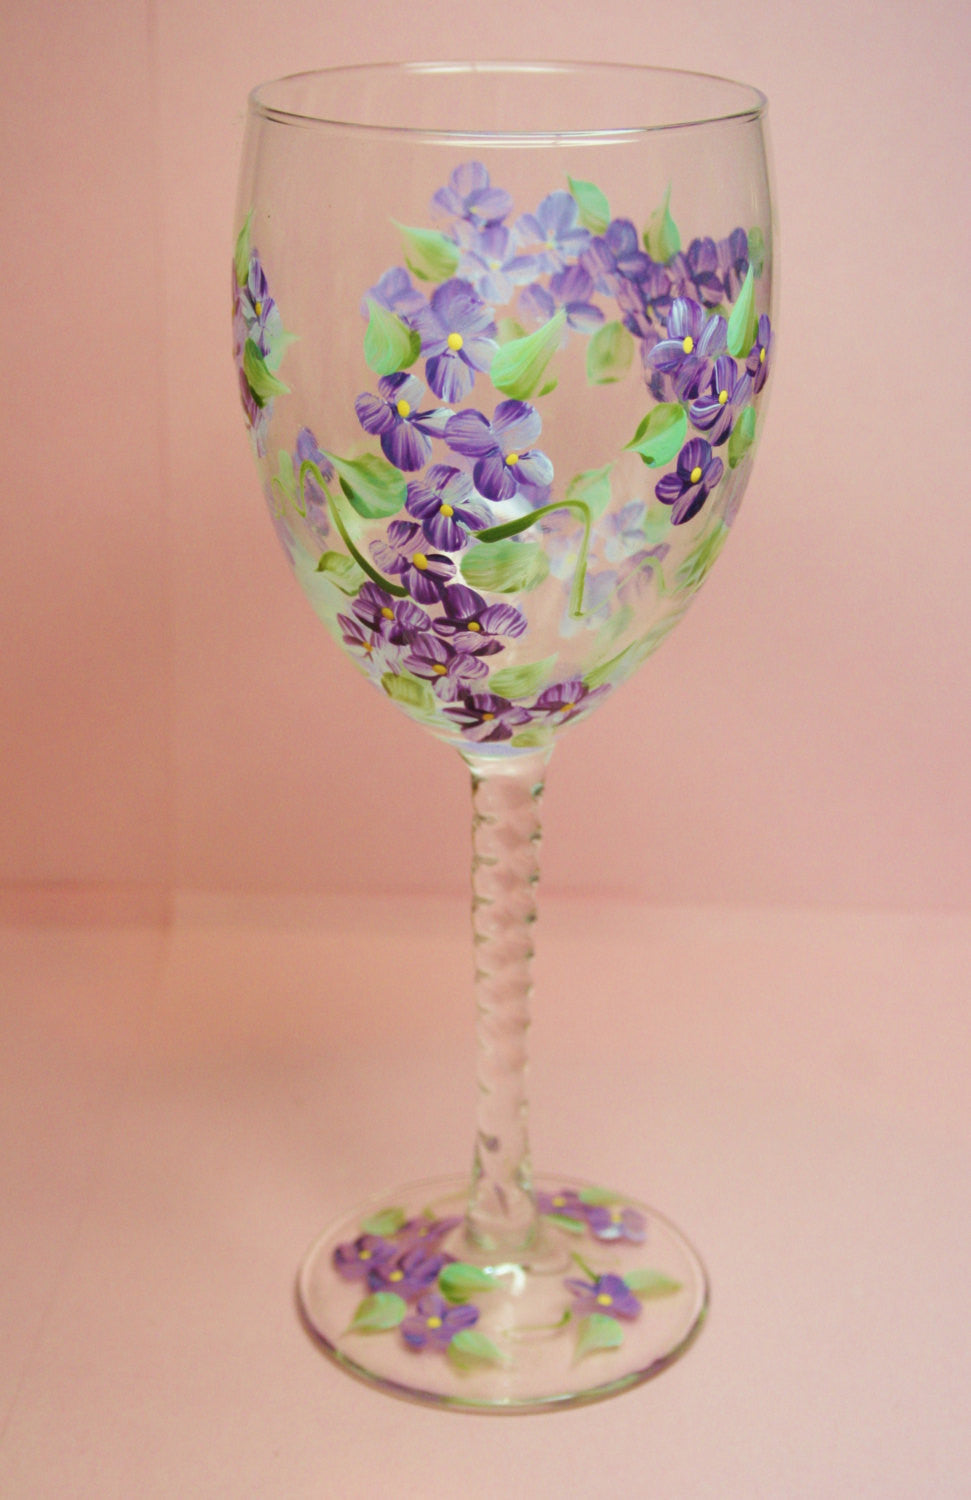 Hand Painted Wine Glass - Purple Forget Me Nots - Original Designs by Cathy Kraemer